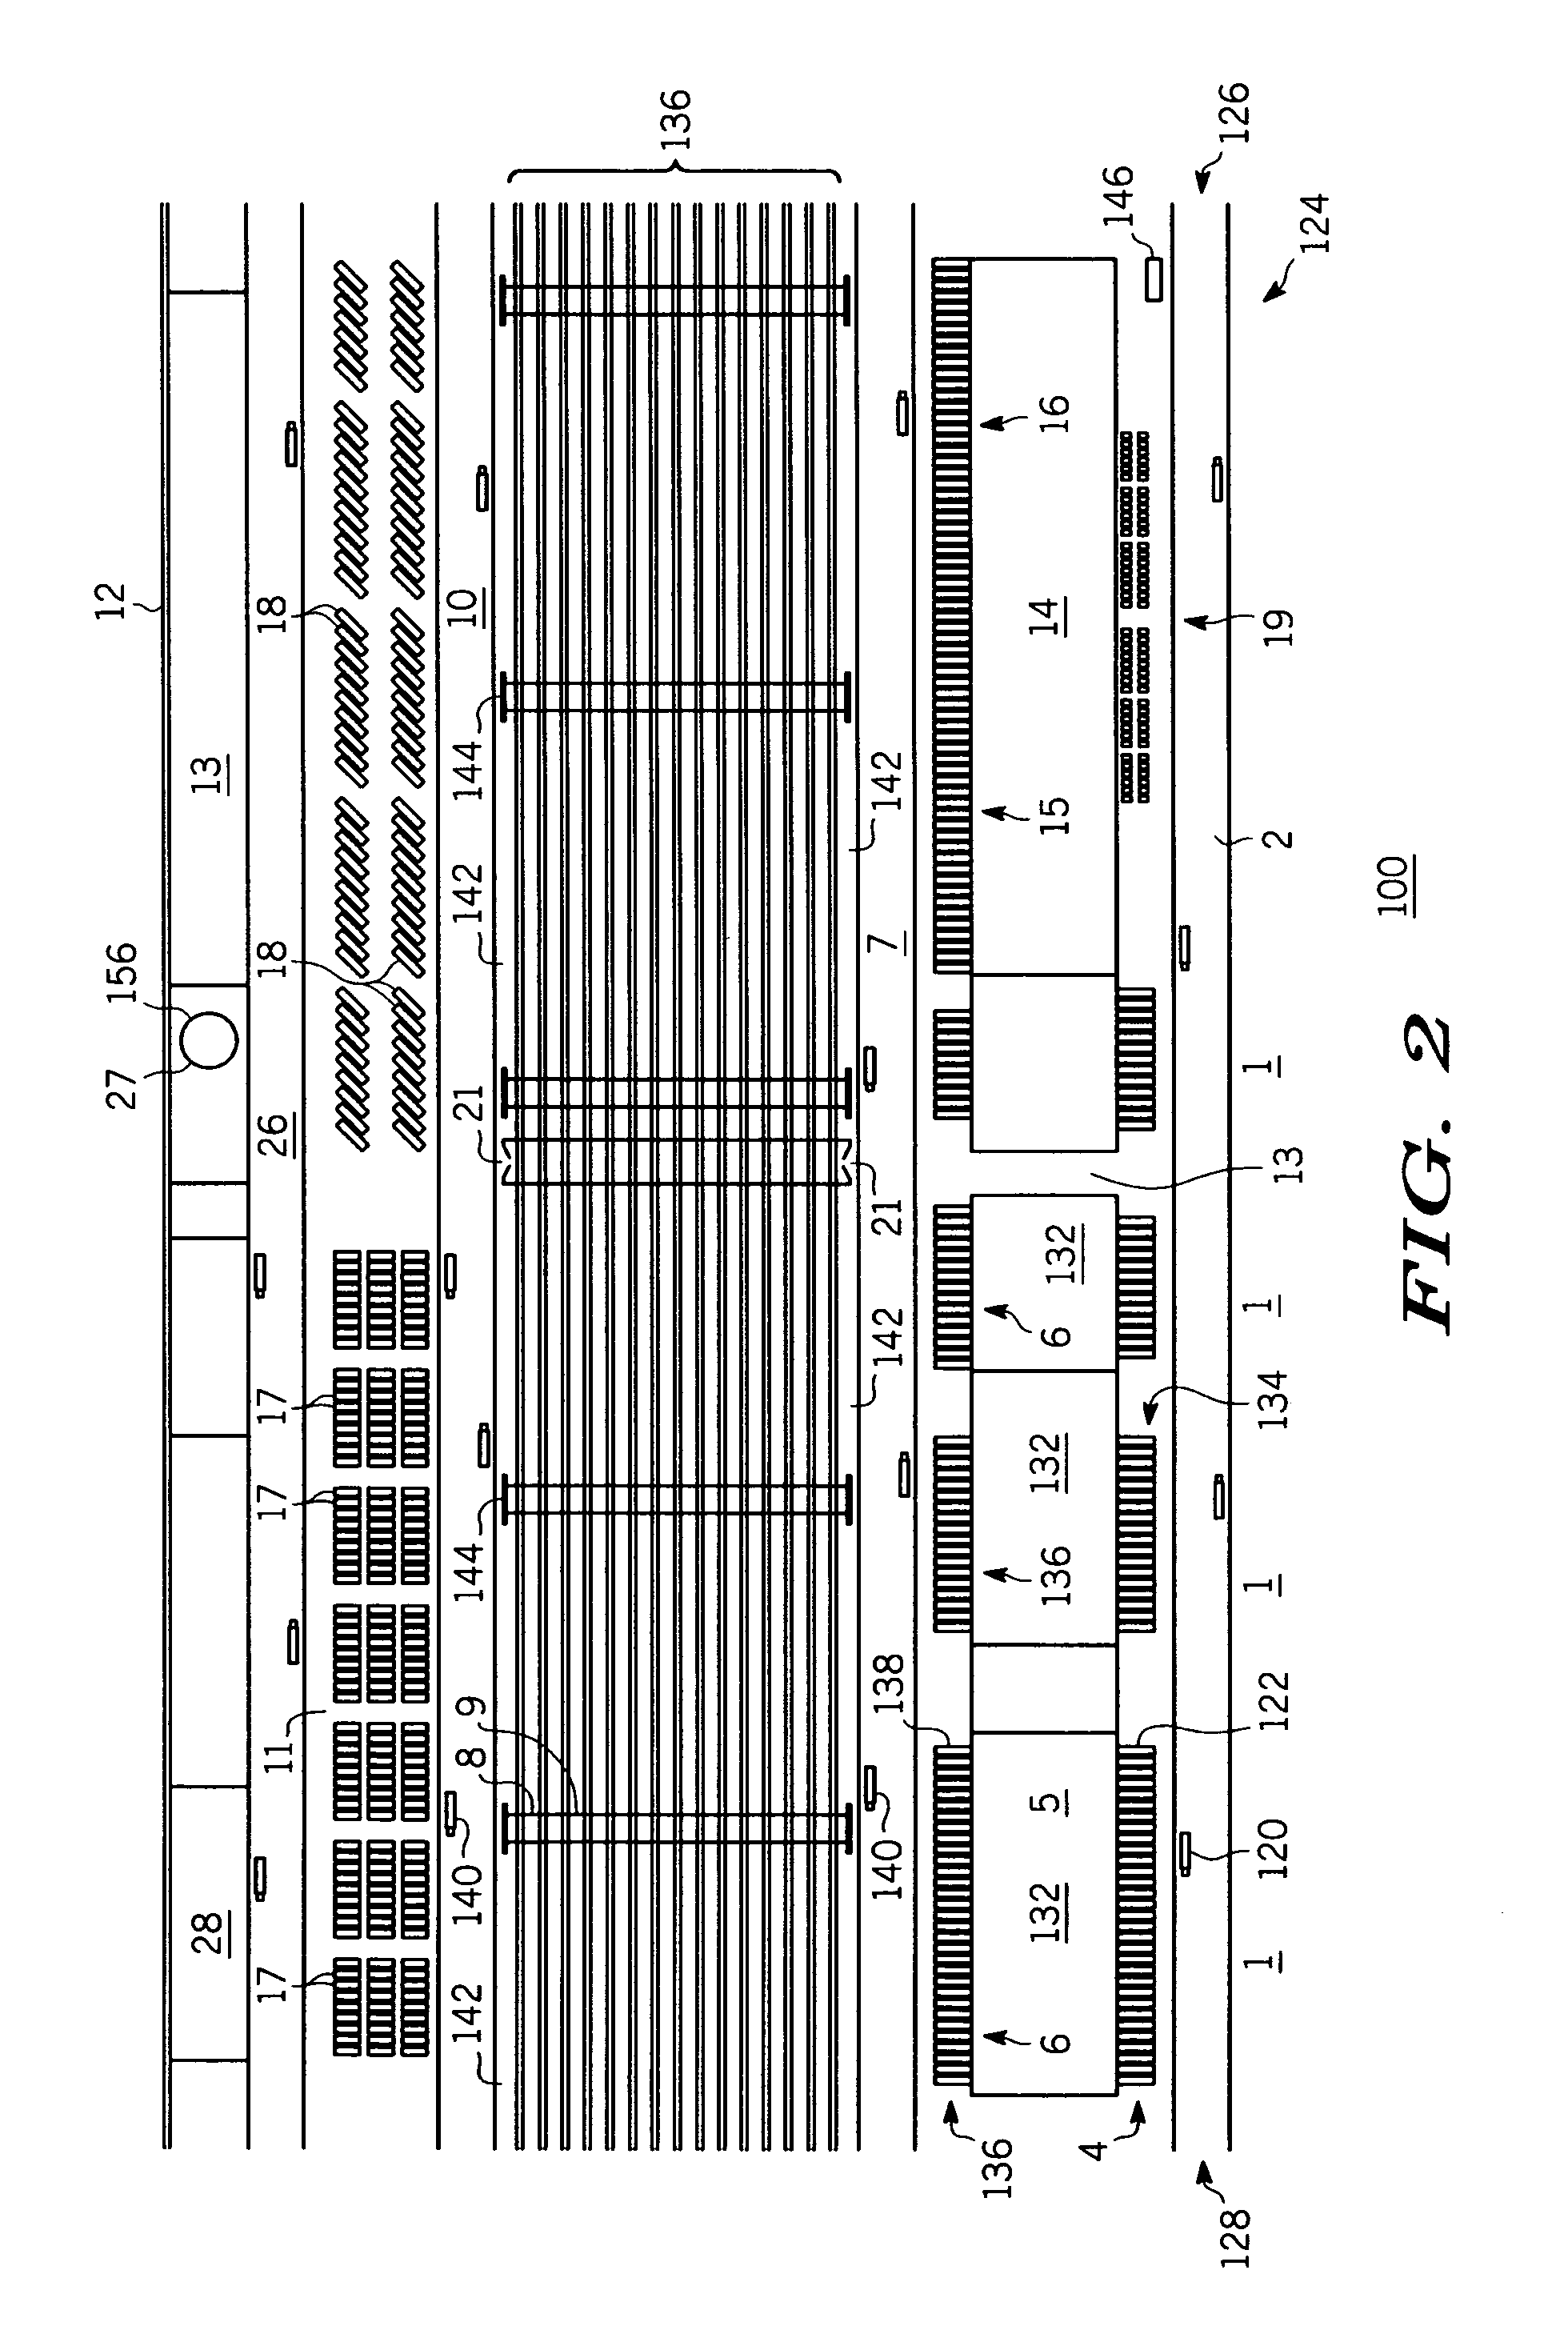 Inline terminal, hub and distribution system